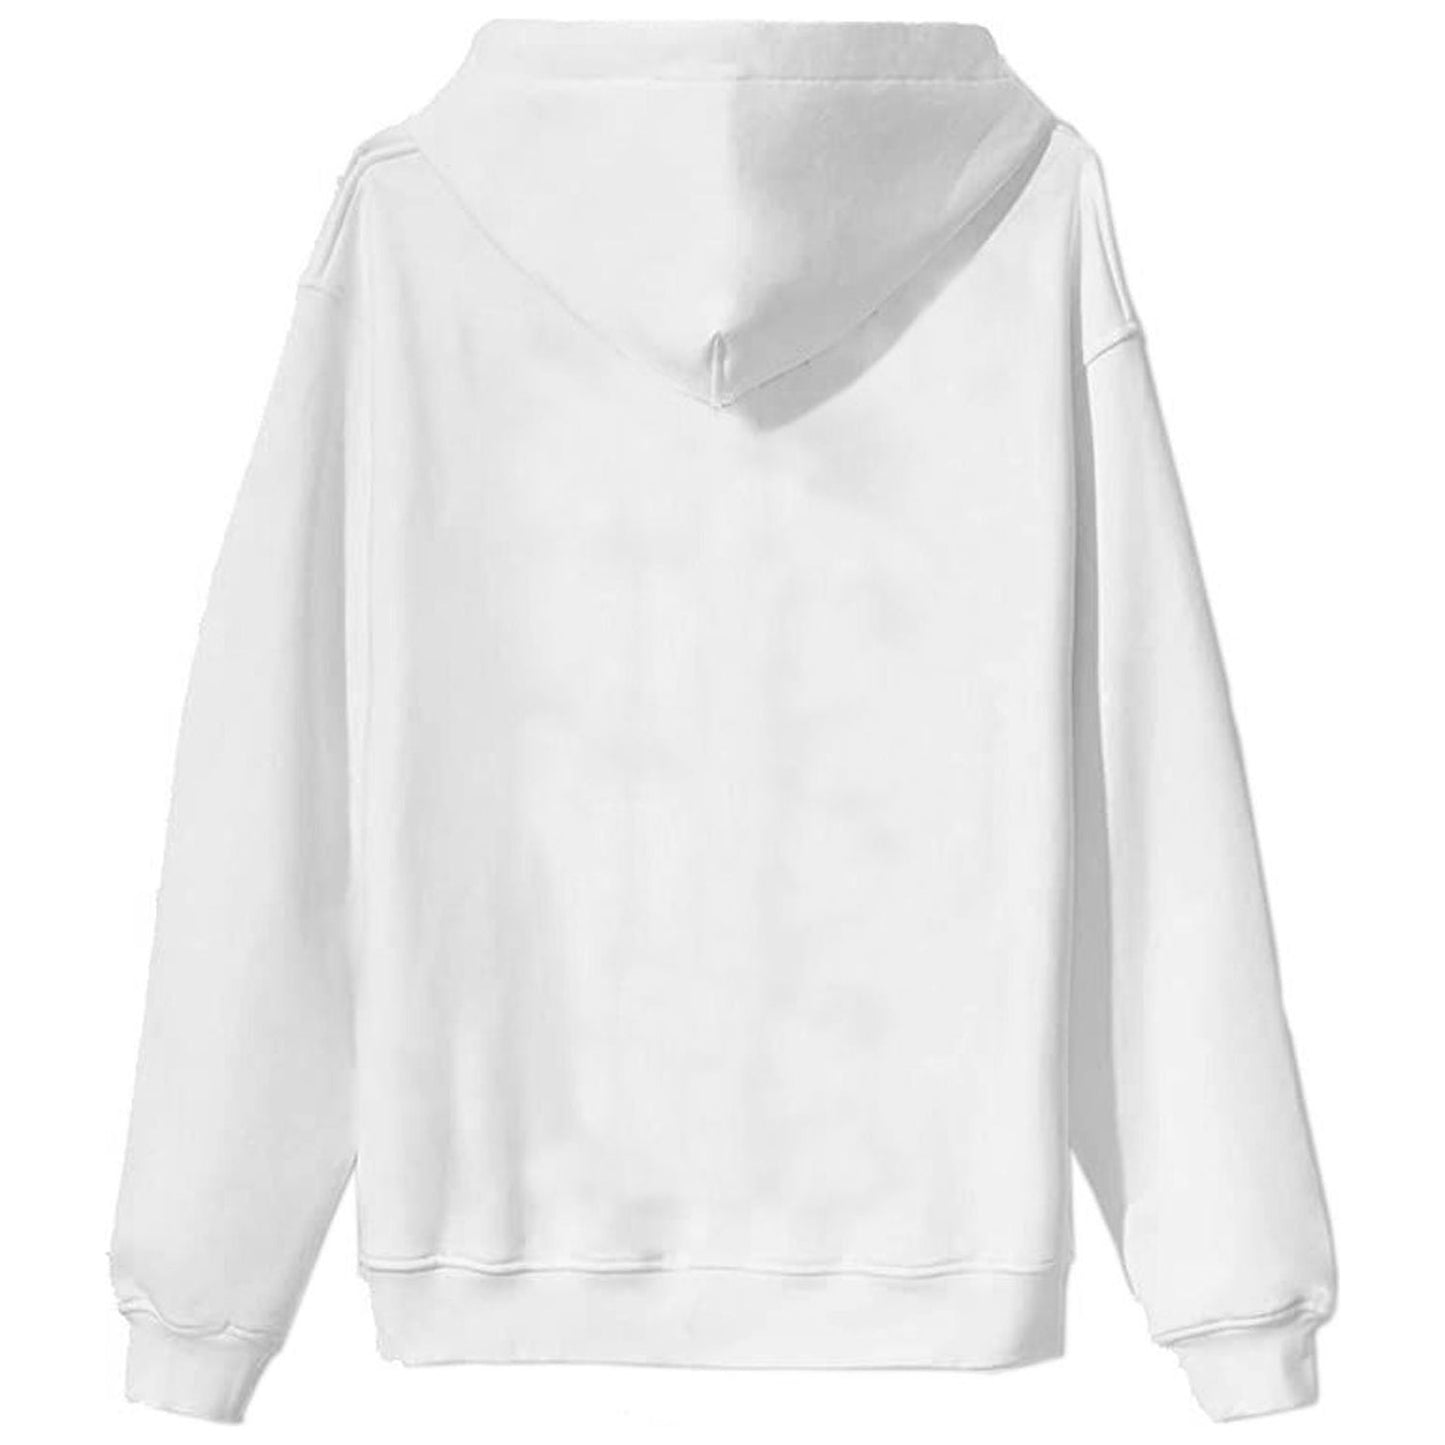 Comme Des Fuckdown Elevated Casual White Hooded Sweatshirt white-cotton-sweater-7 product-8459-1370660684-fc5612f9-581.jpg